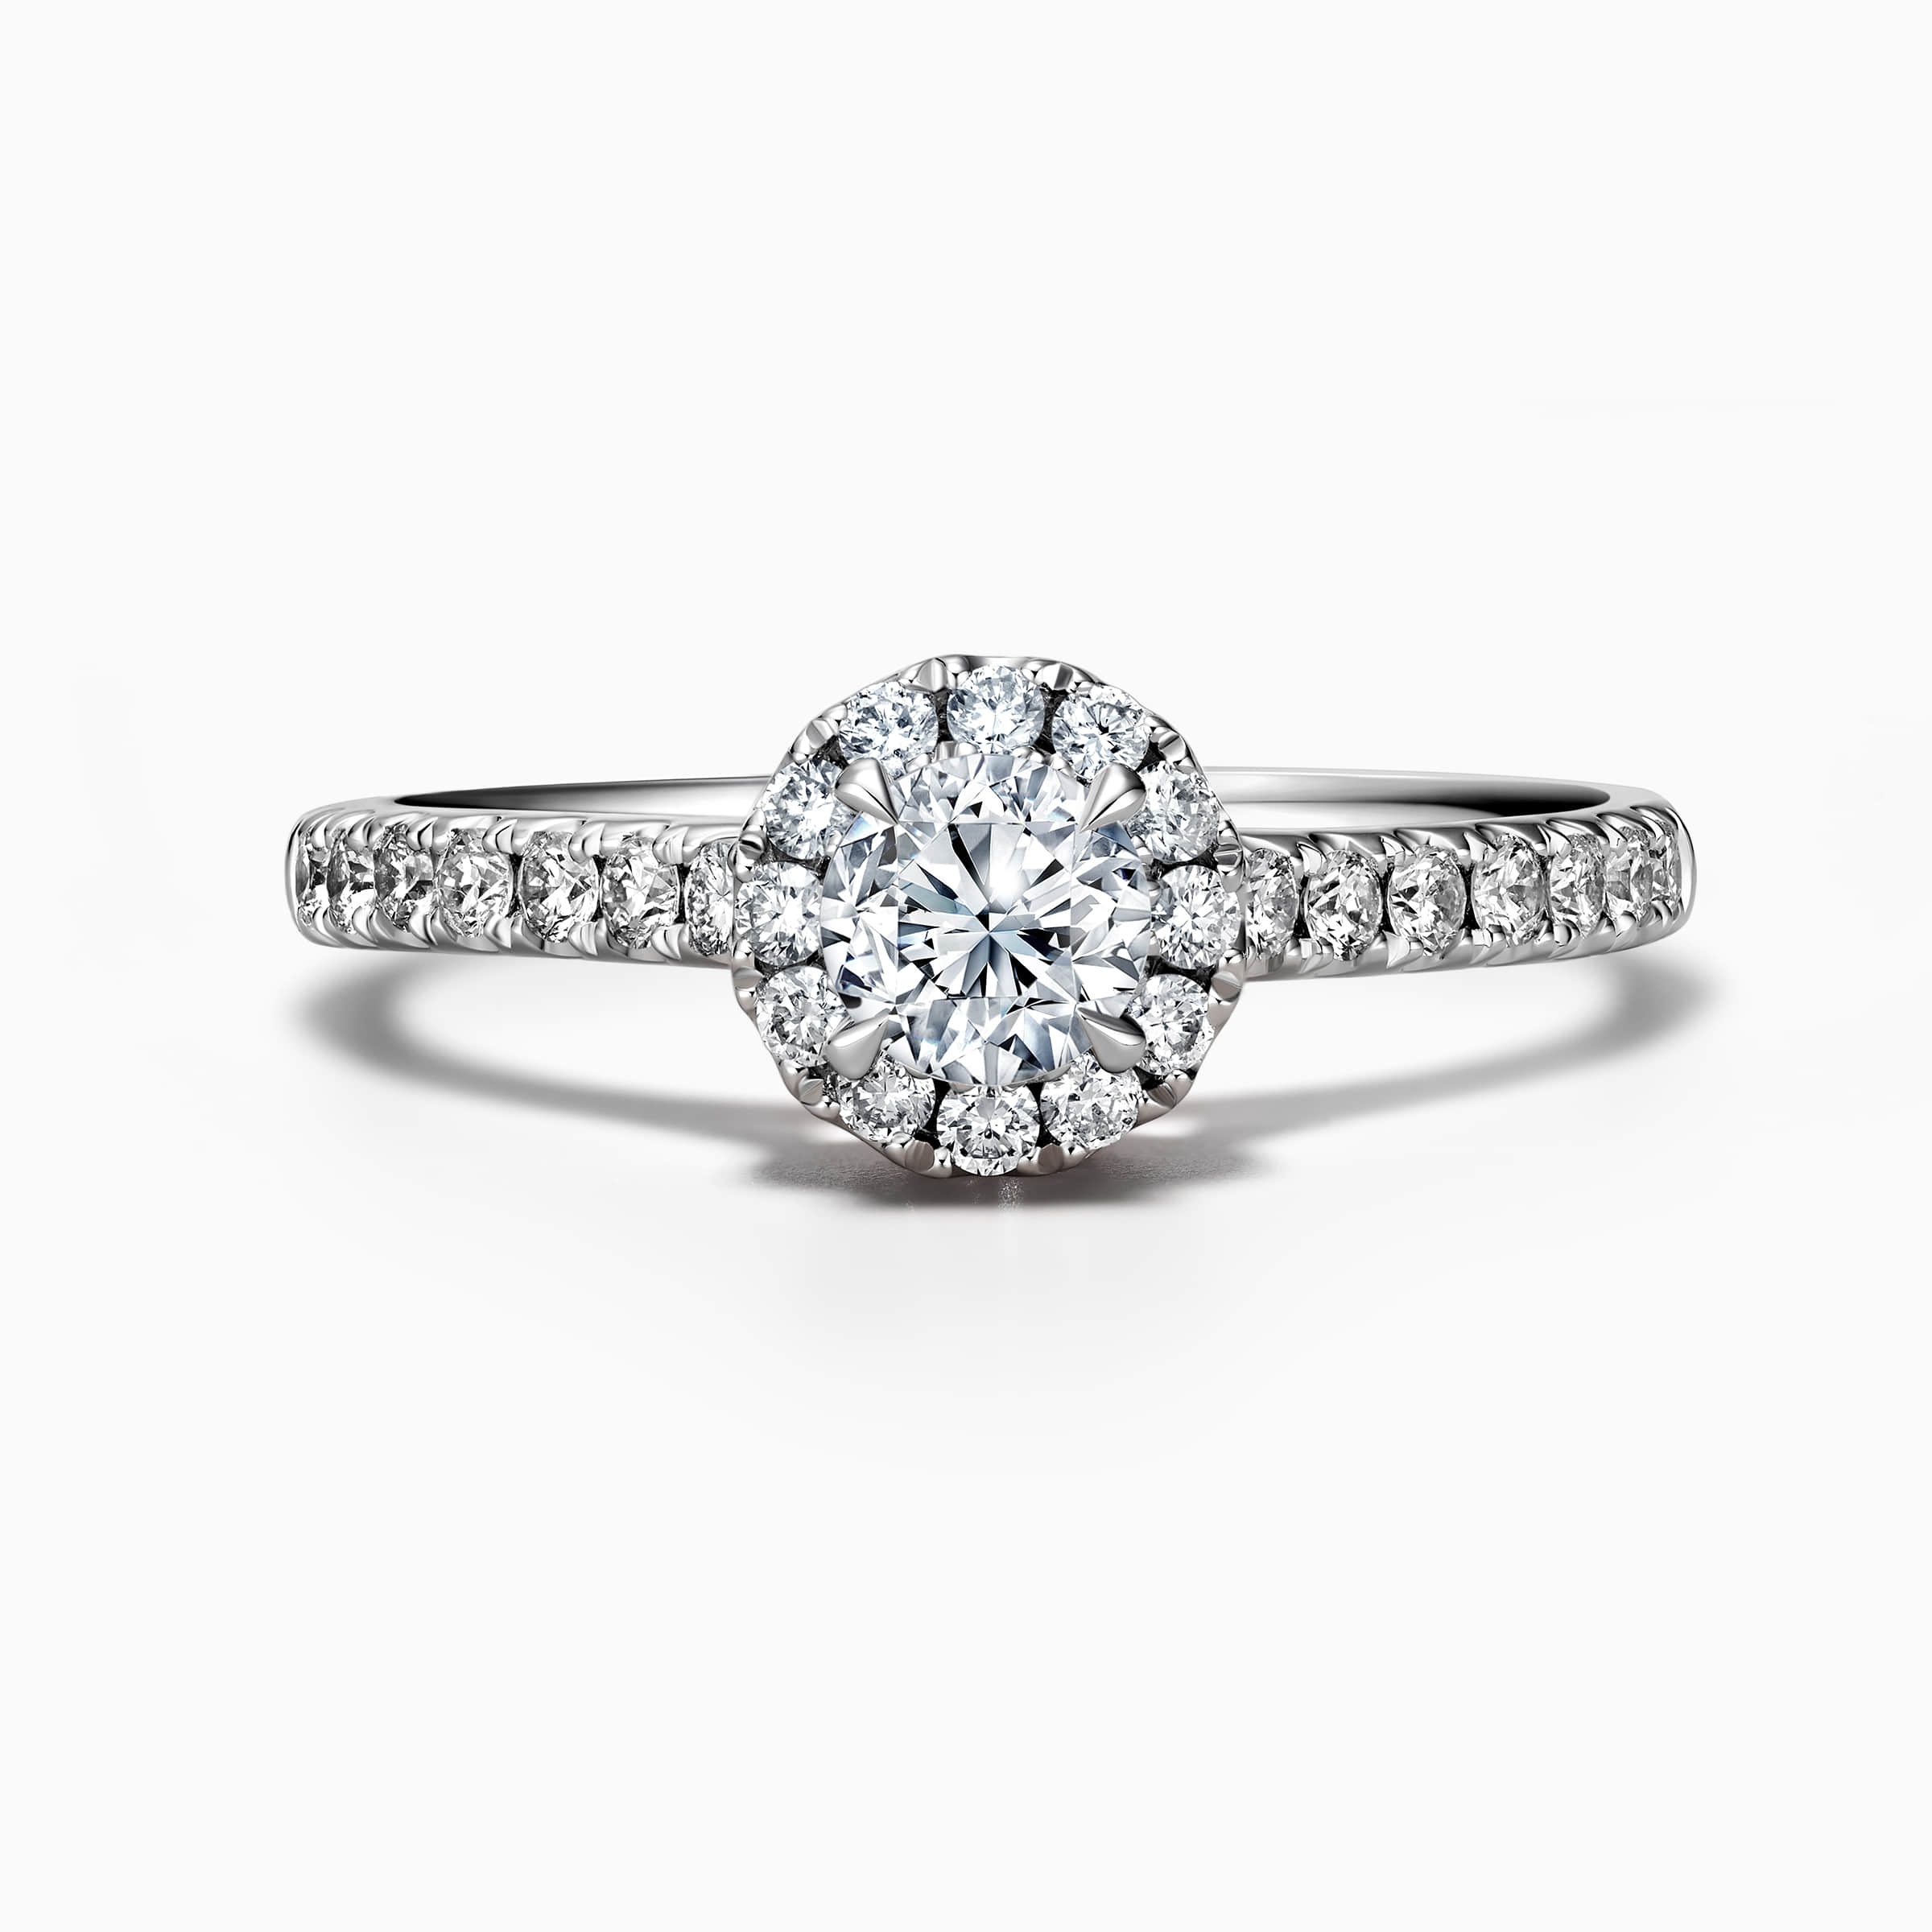 DR Love Mark round halo engagement ring